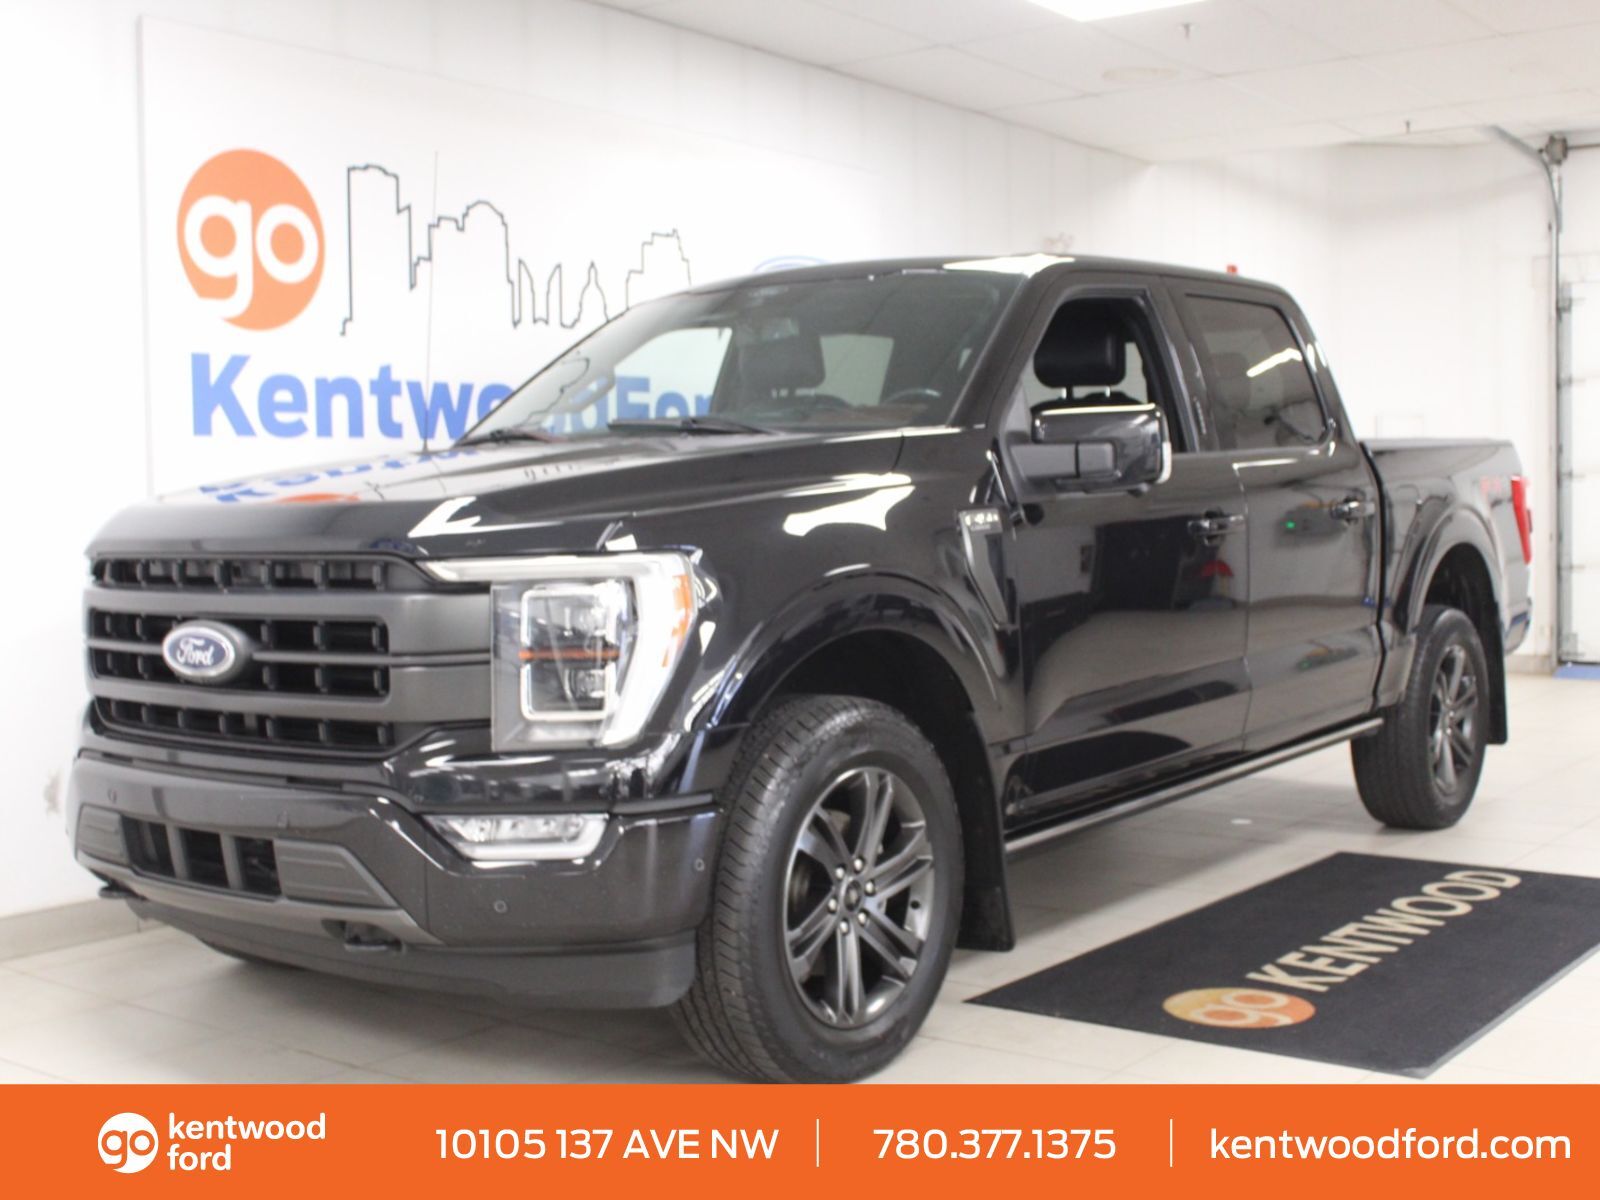 2021 Ford F-150 Lariat | 502a | 4x4 | Sport | 20s | FX4 | Moonroof